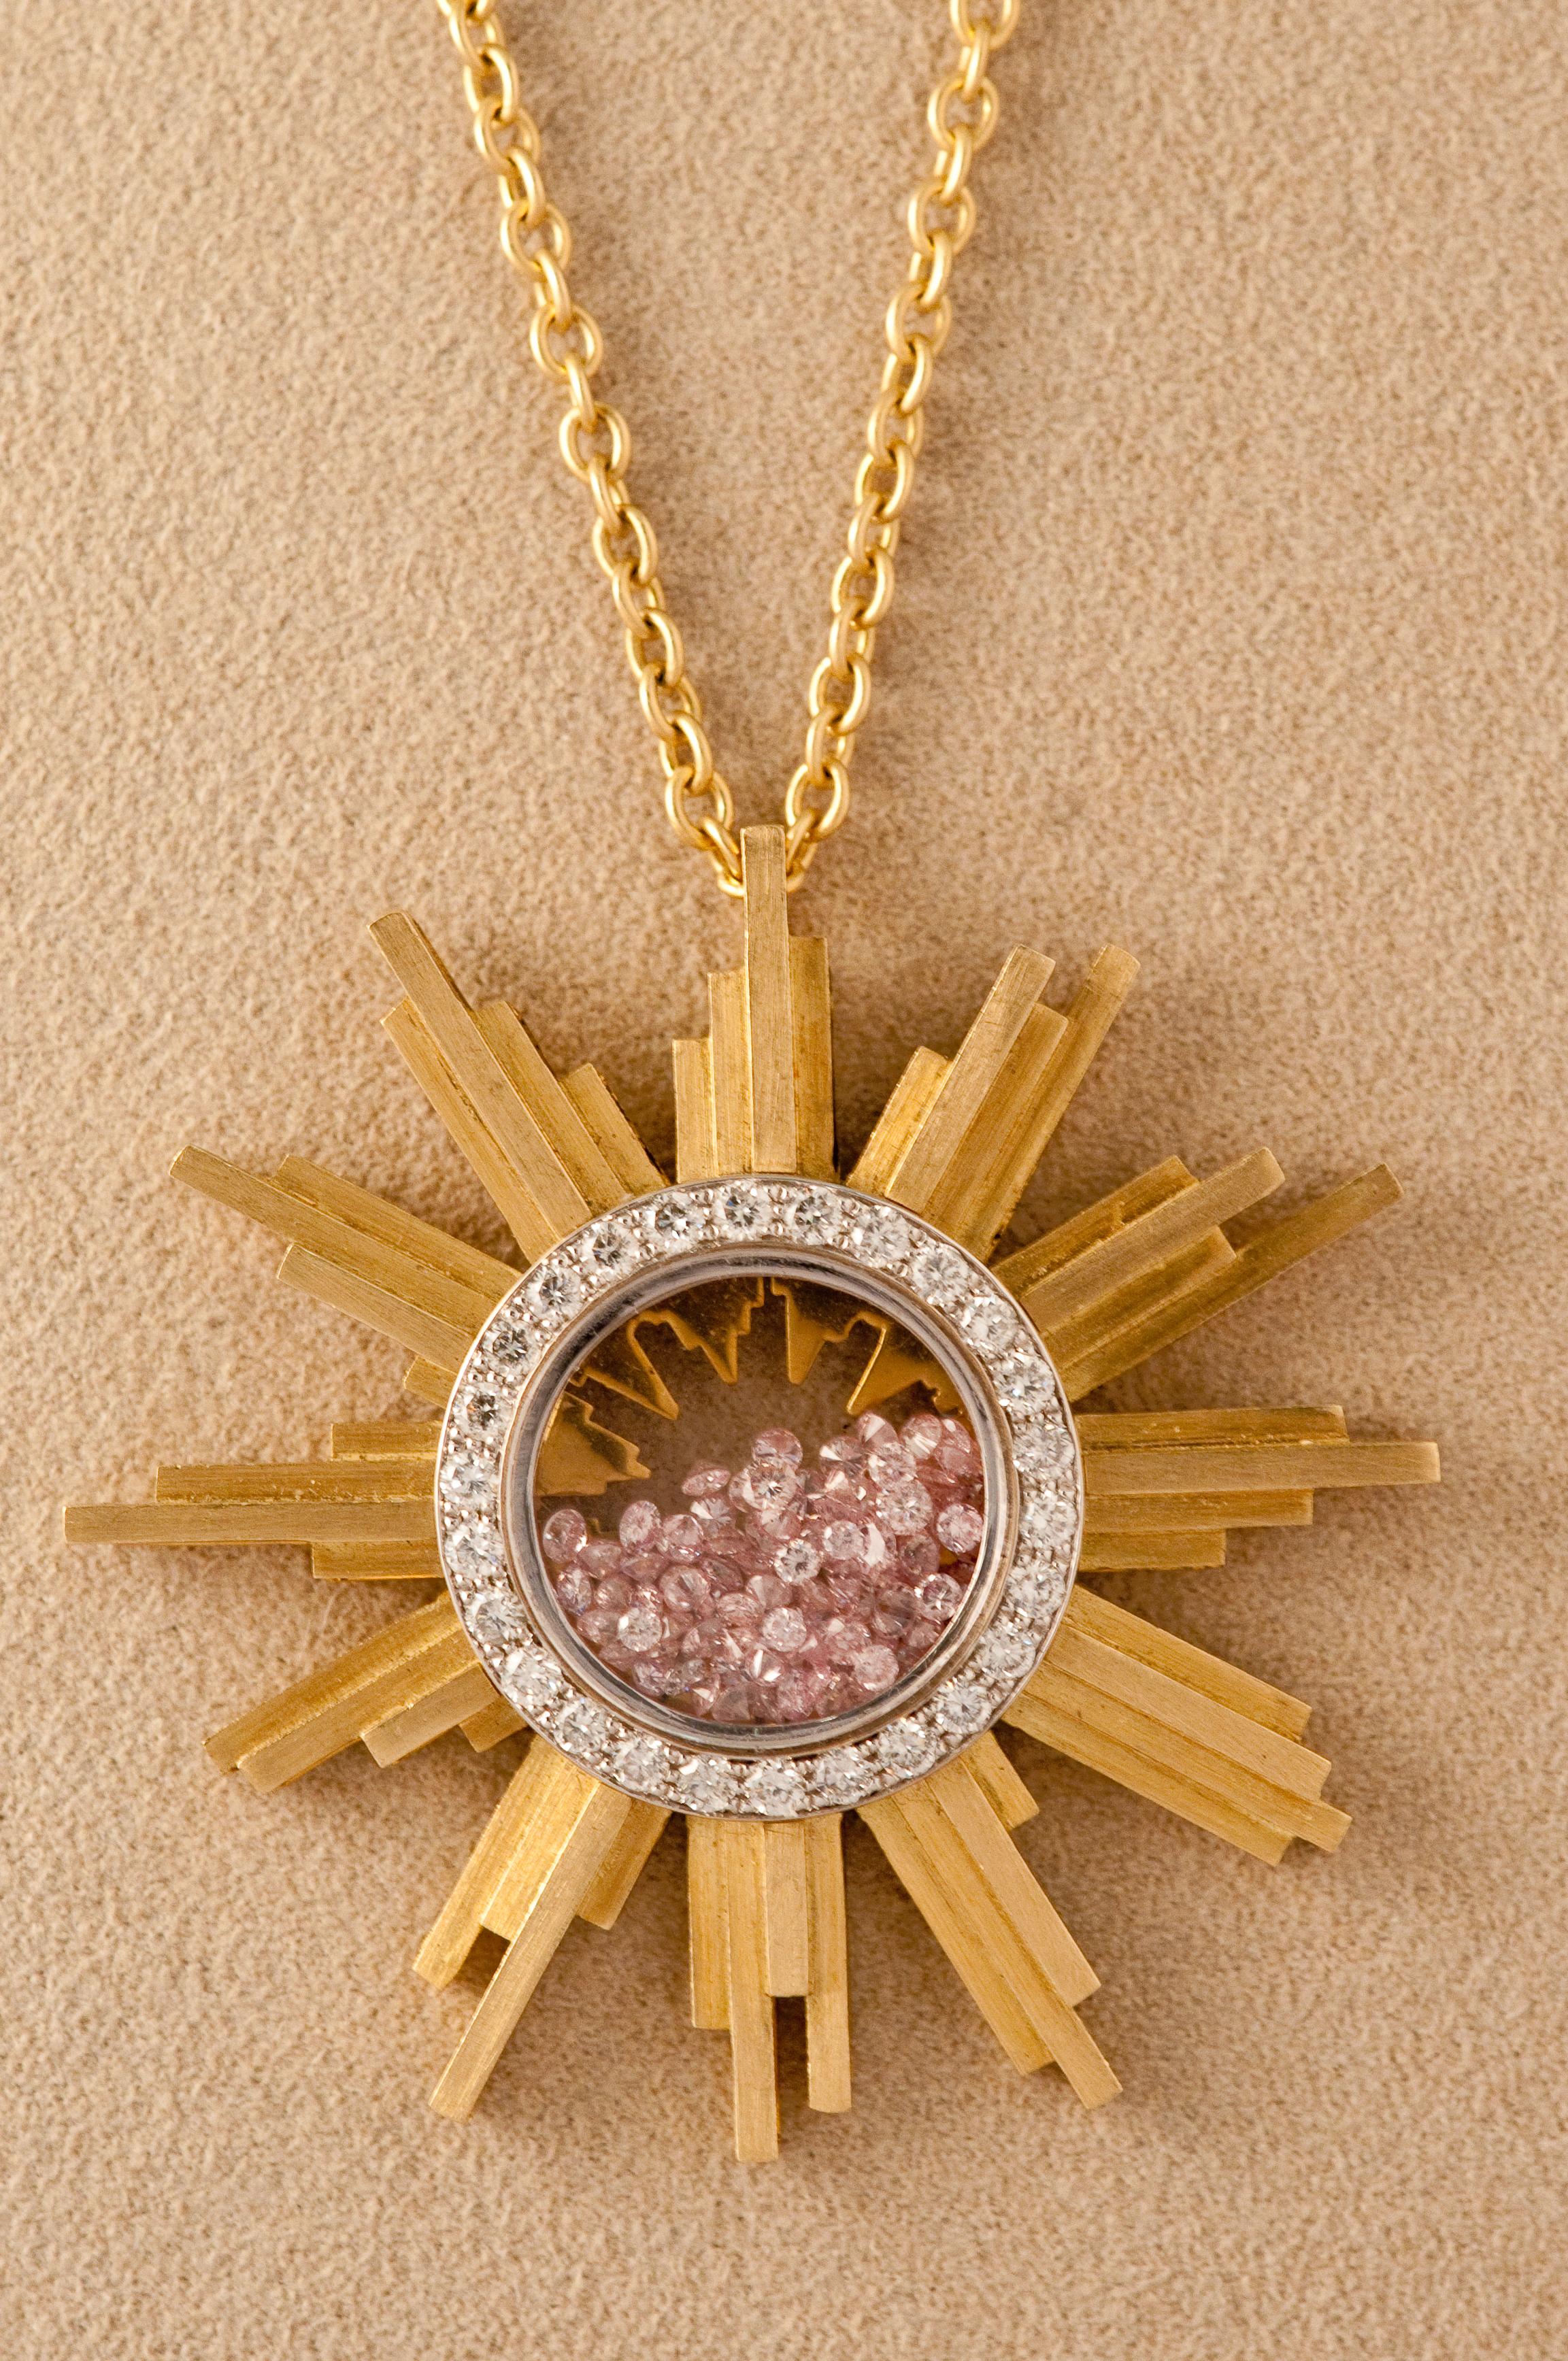 Round Cut Necklace, Yellow Gold Sun 34 Grams, Diamonds Withe and Pink 2.27 Carat, Unique